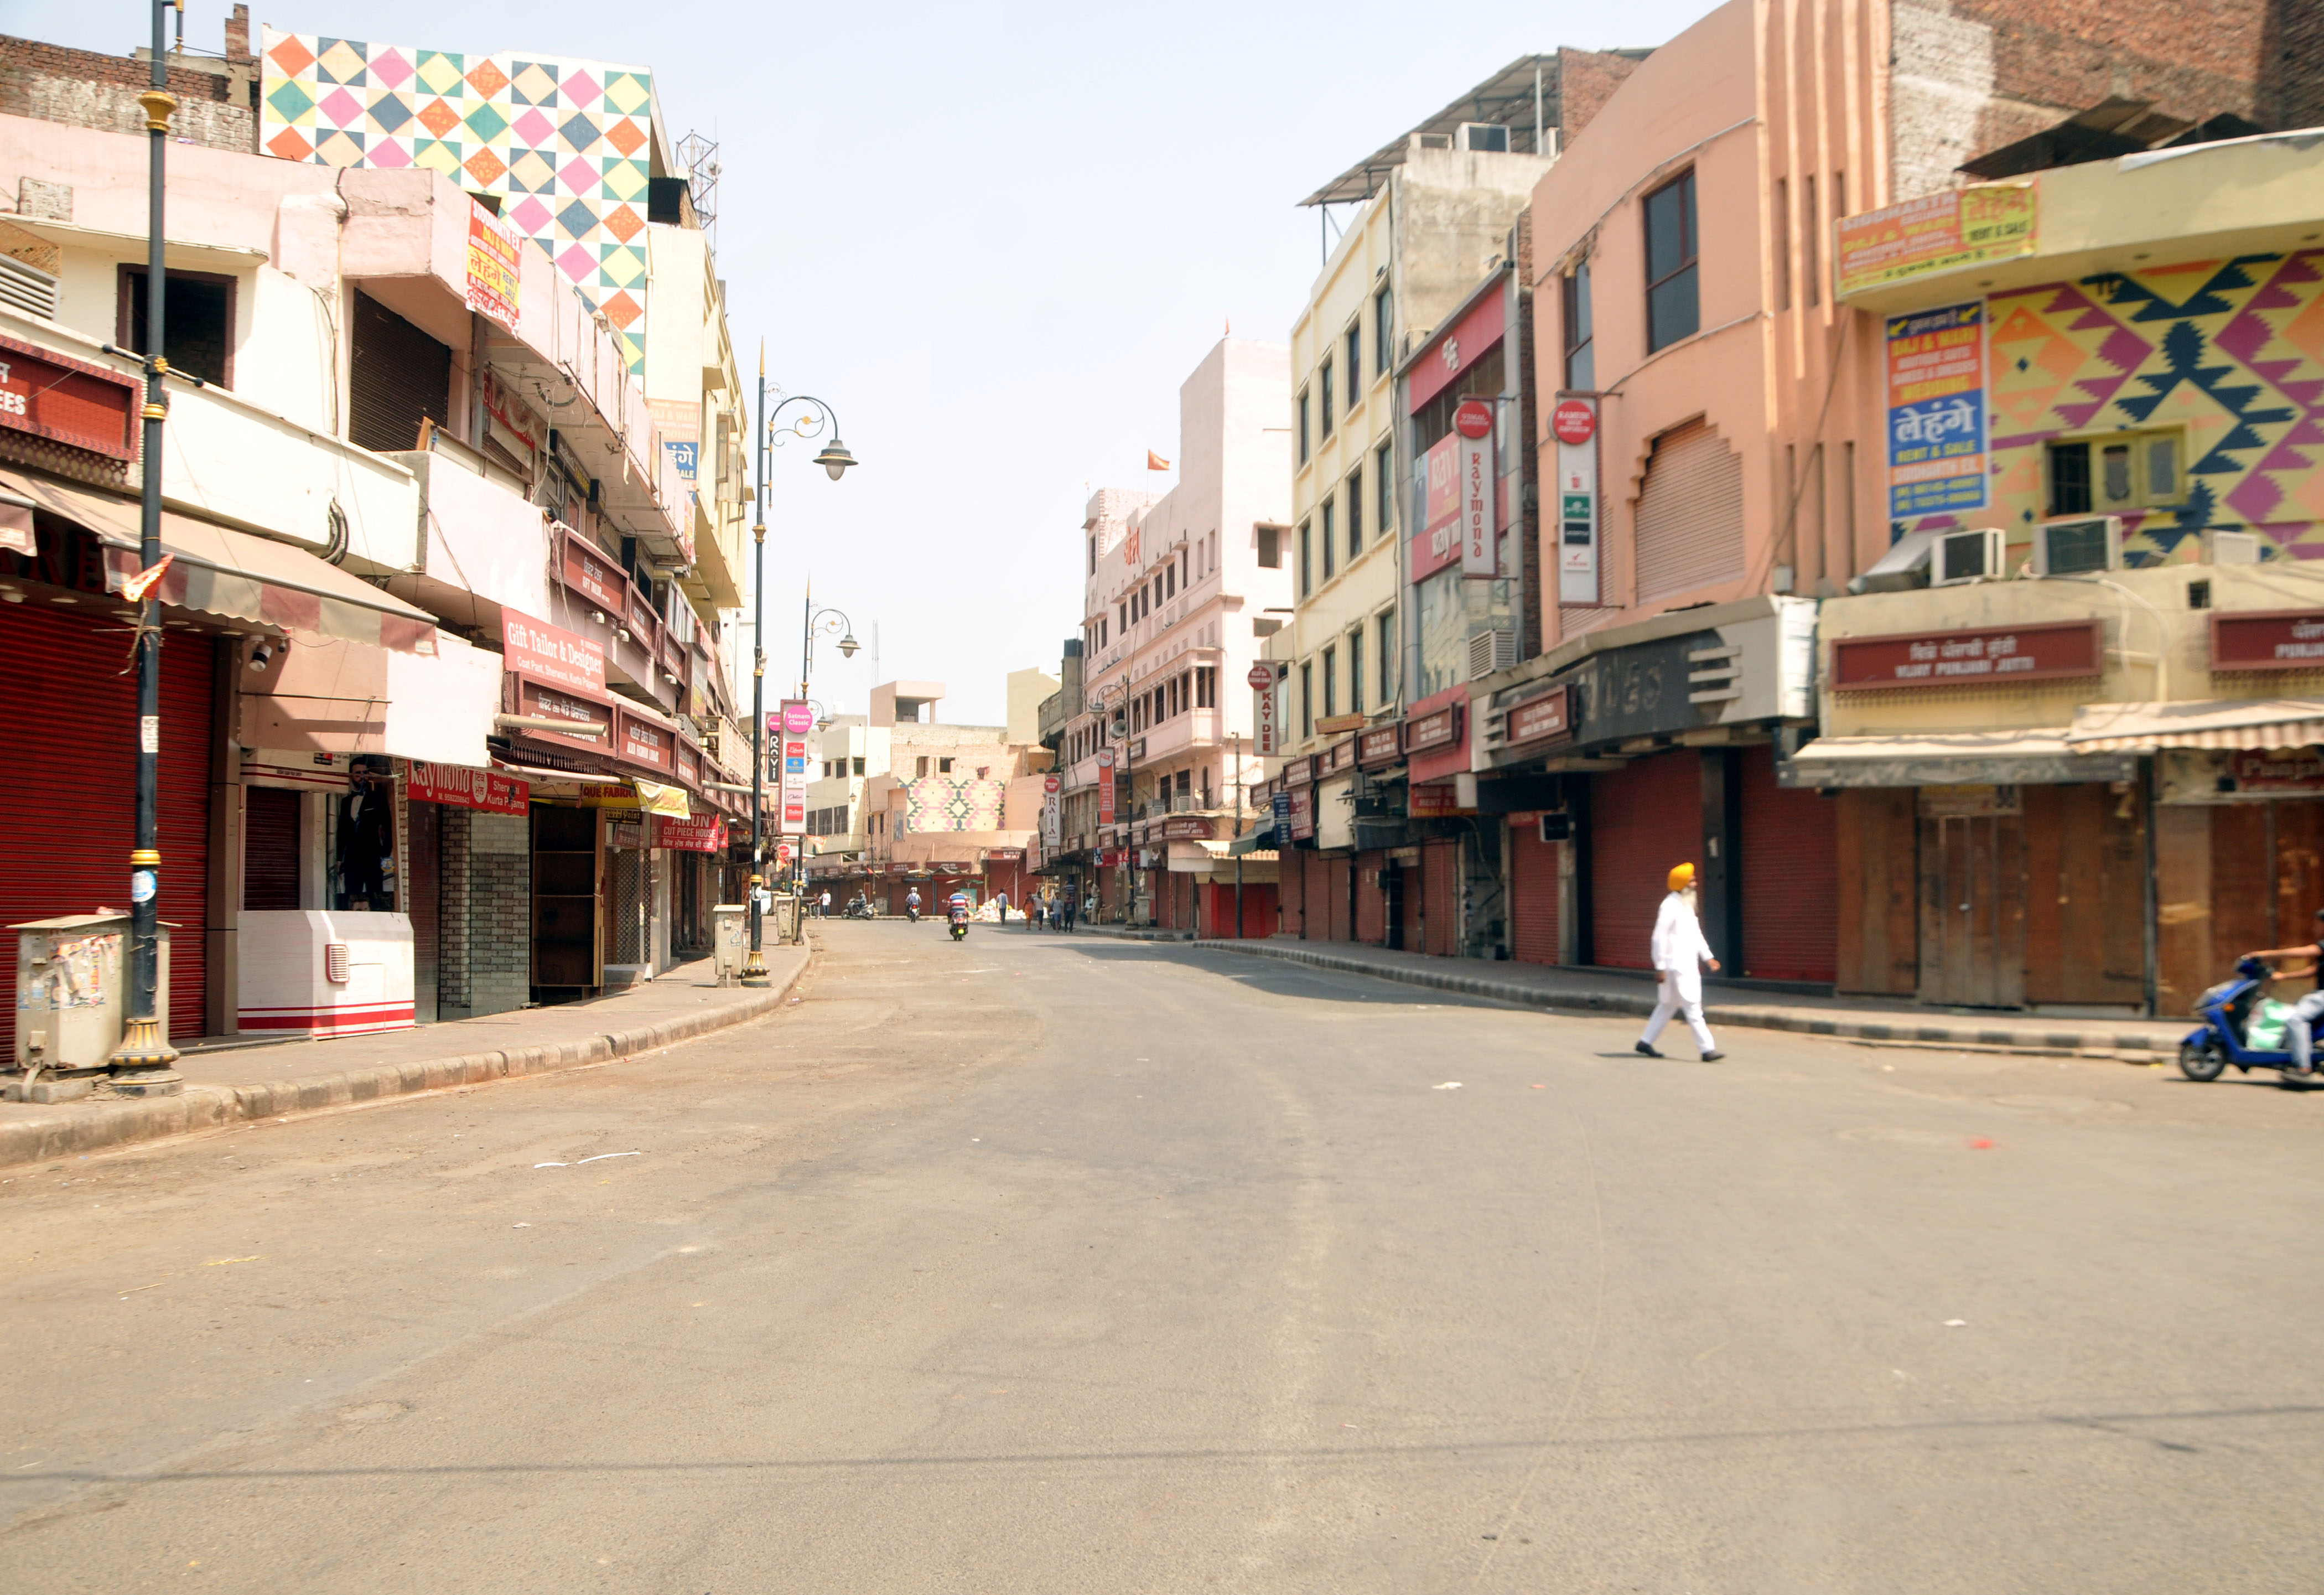 Complete bandh observed in Amritsar to mark Operation Bluestar anniversary